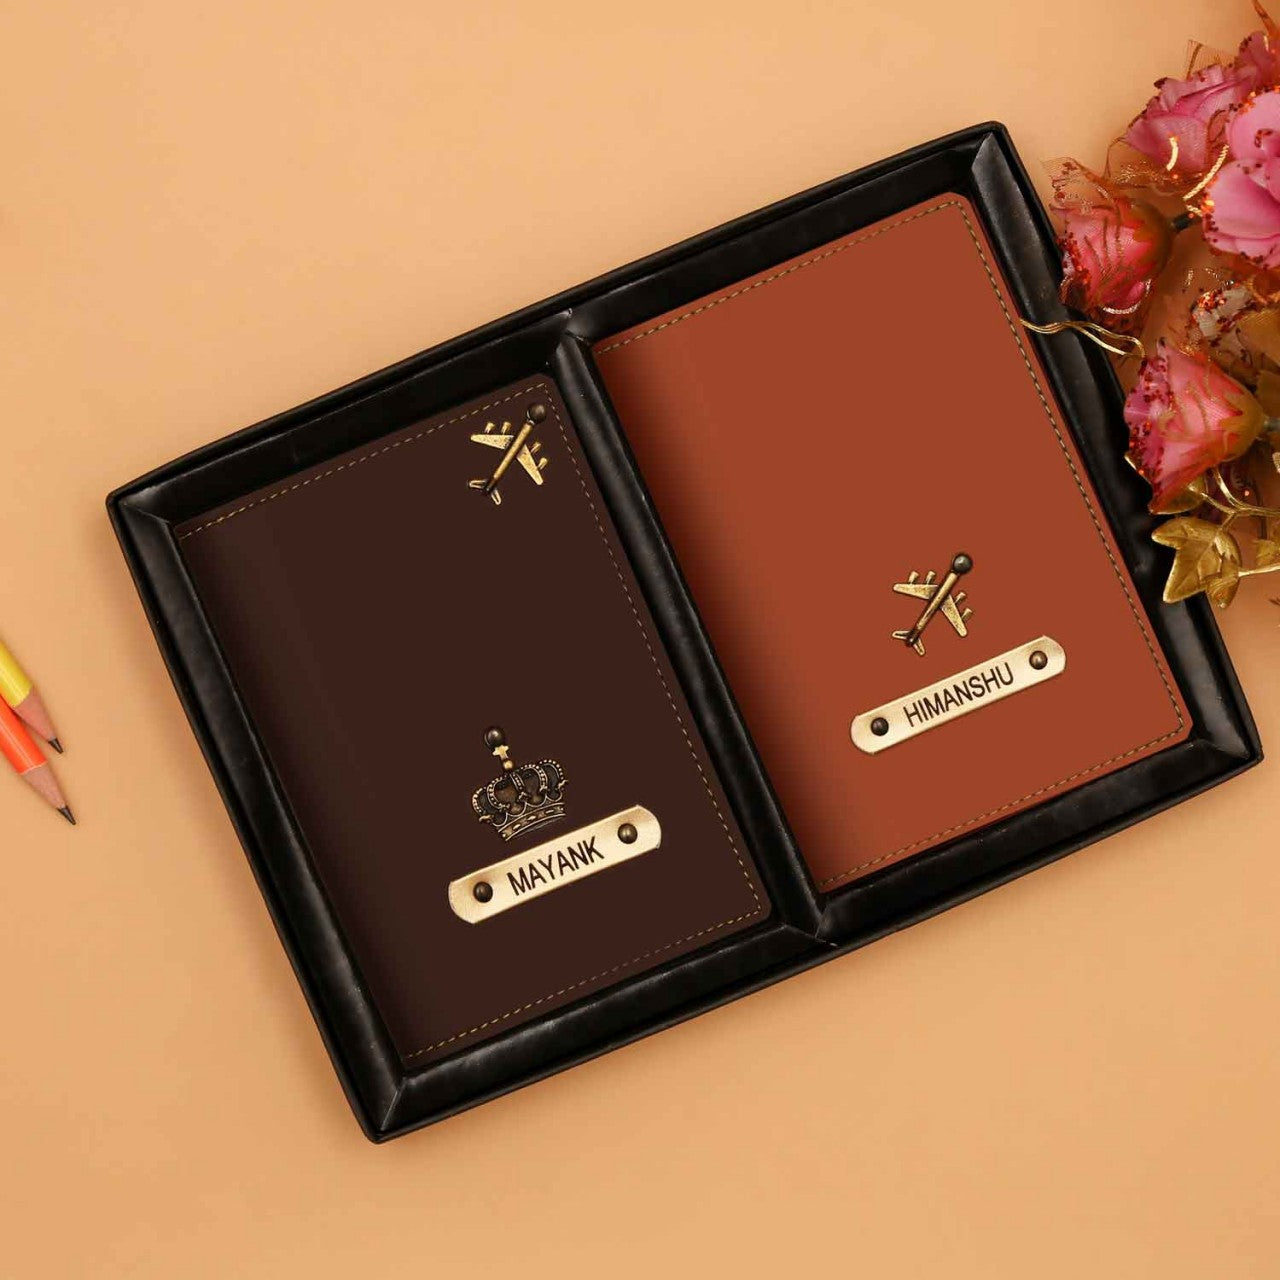 Personalized Leather Passport Covers For Couple